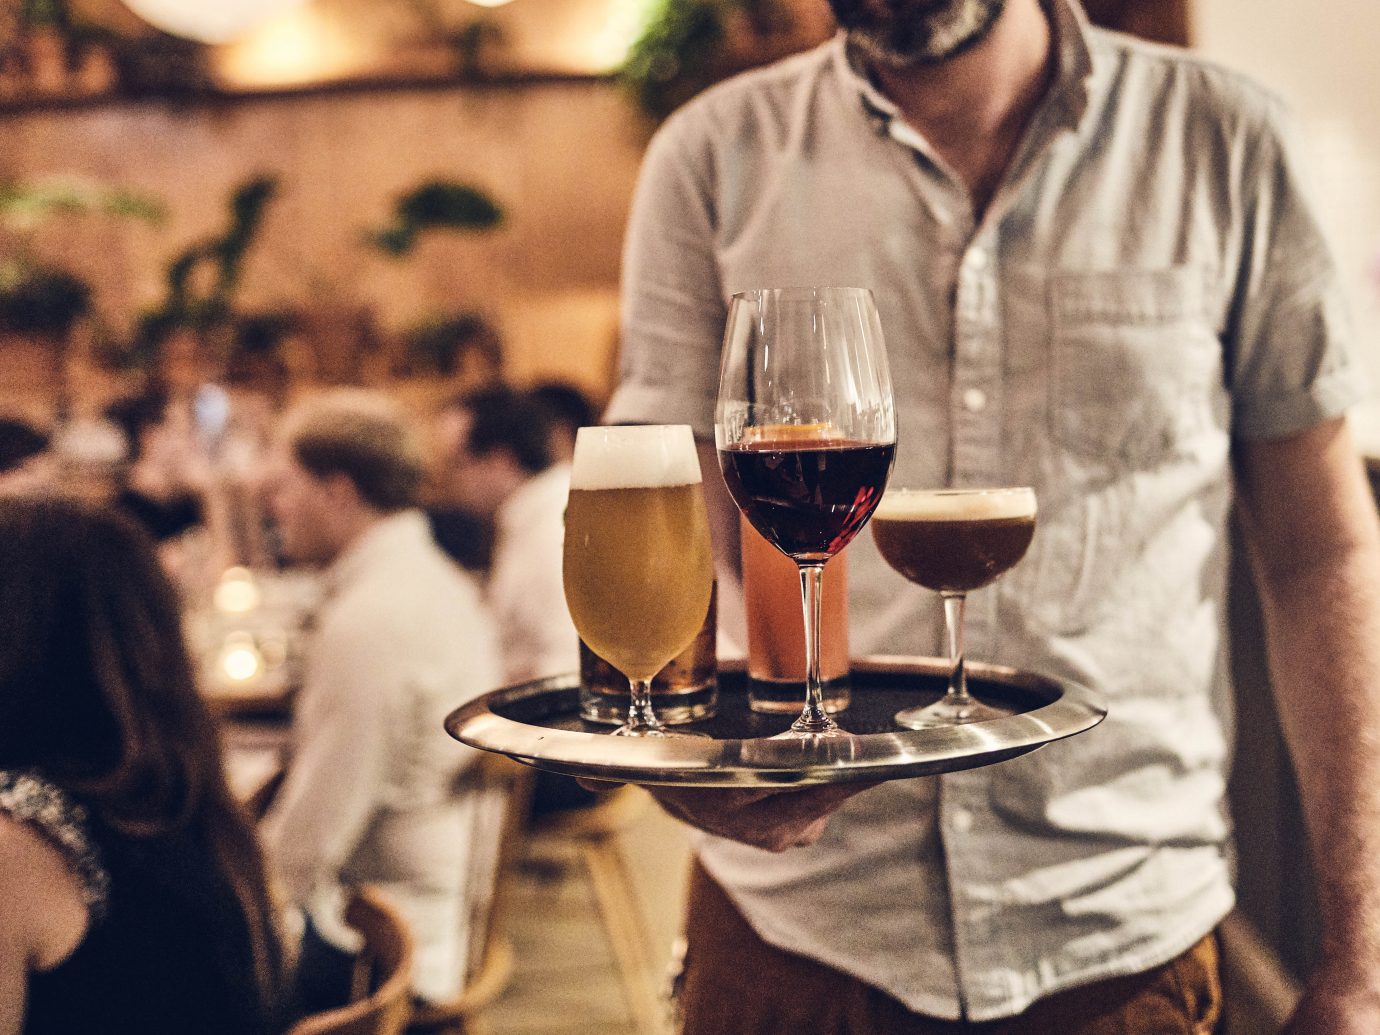 Serving walking to table in packed restaurant interior with tray of drinks